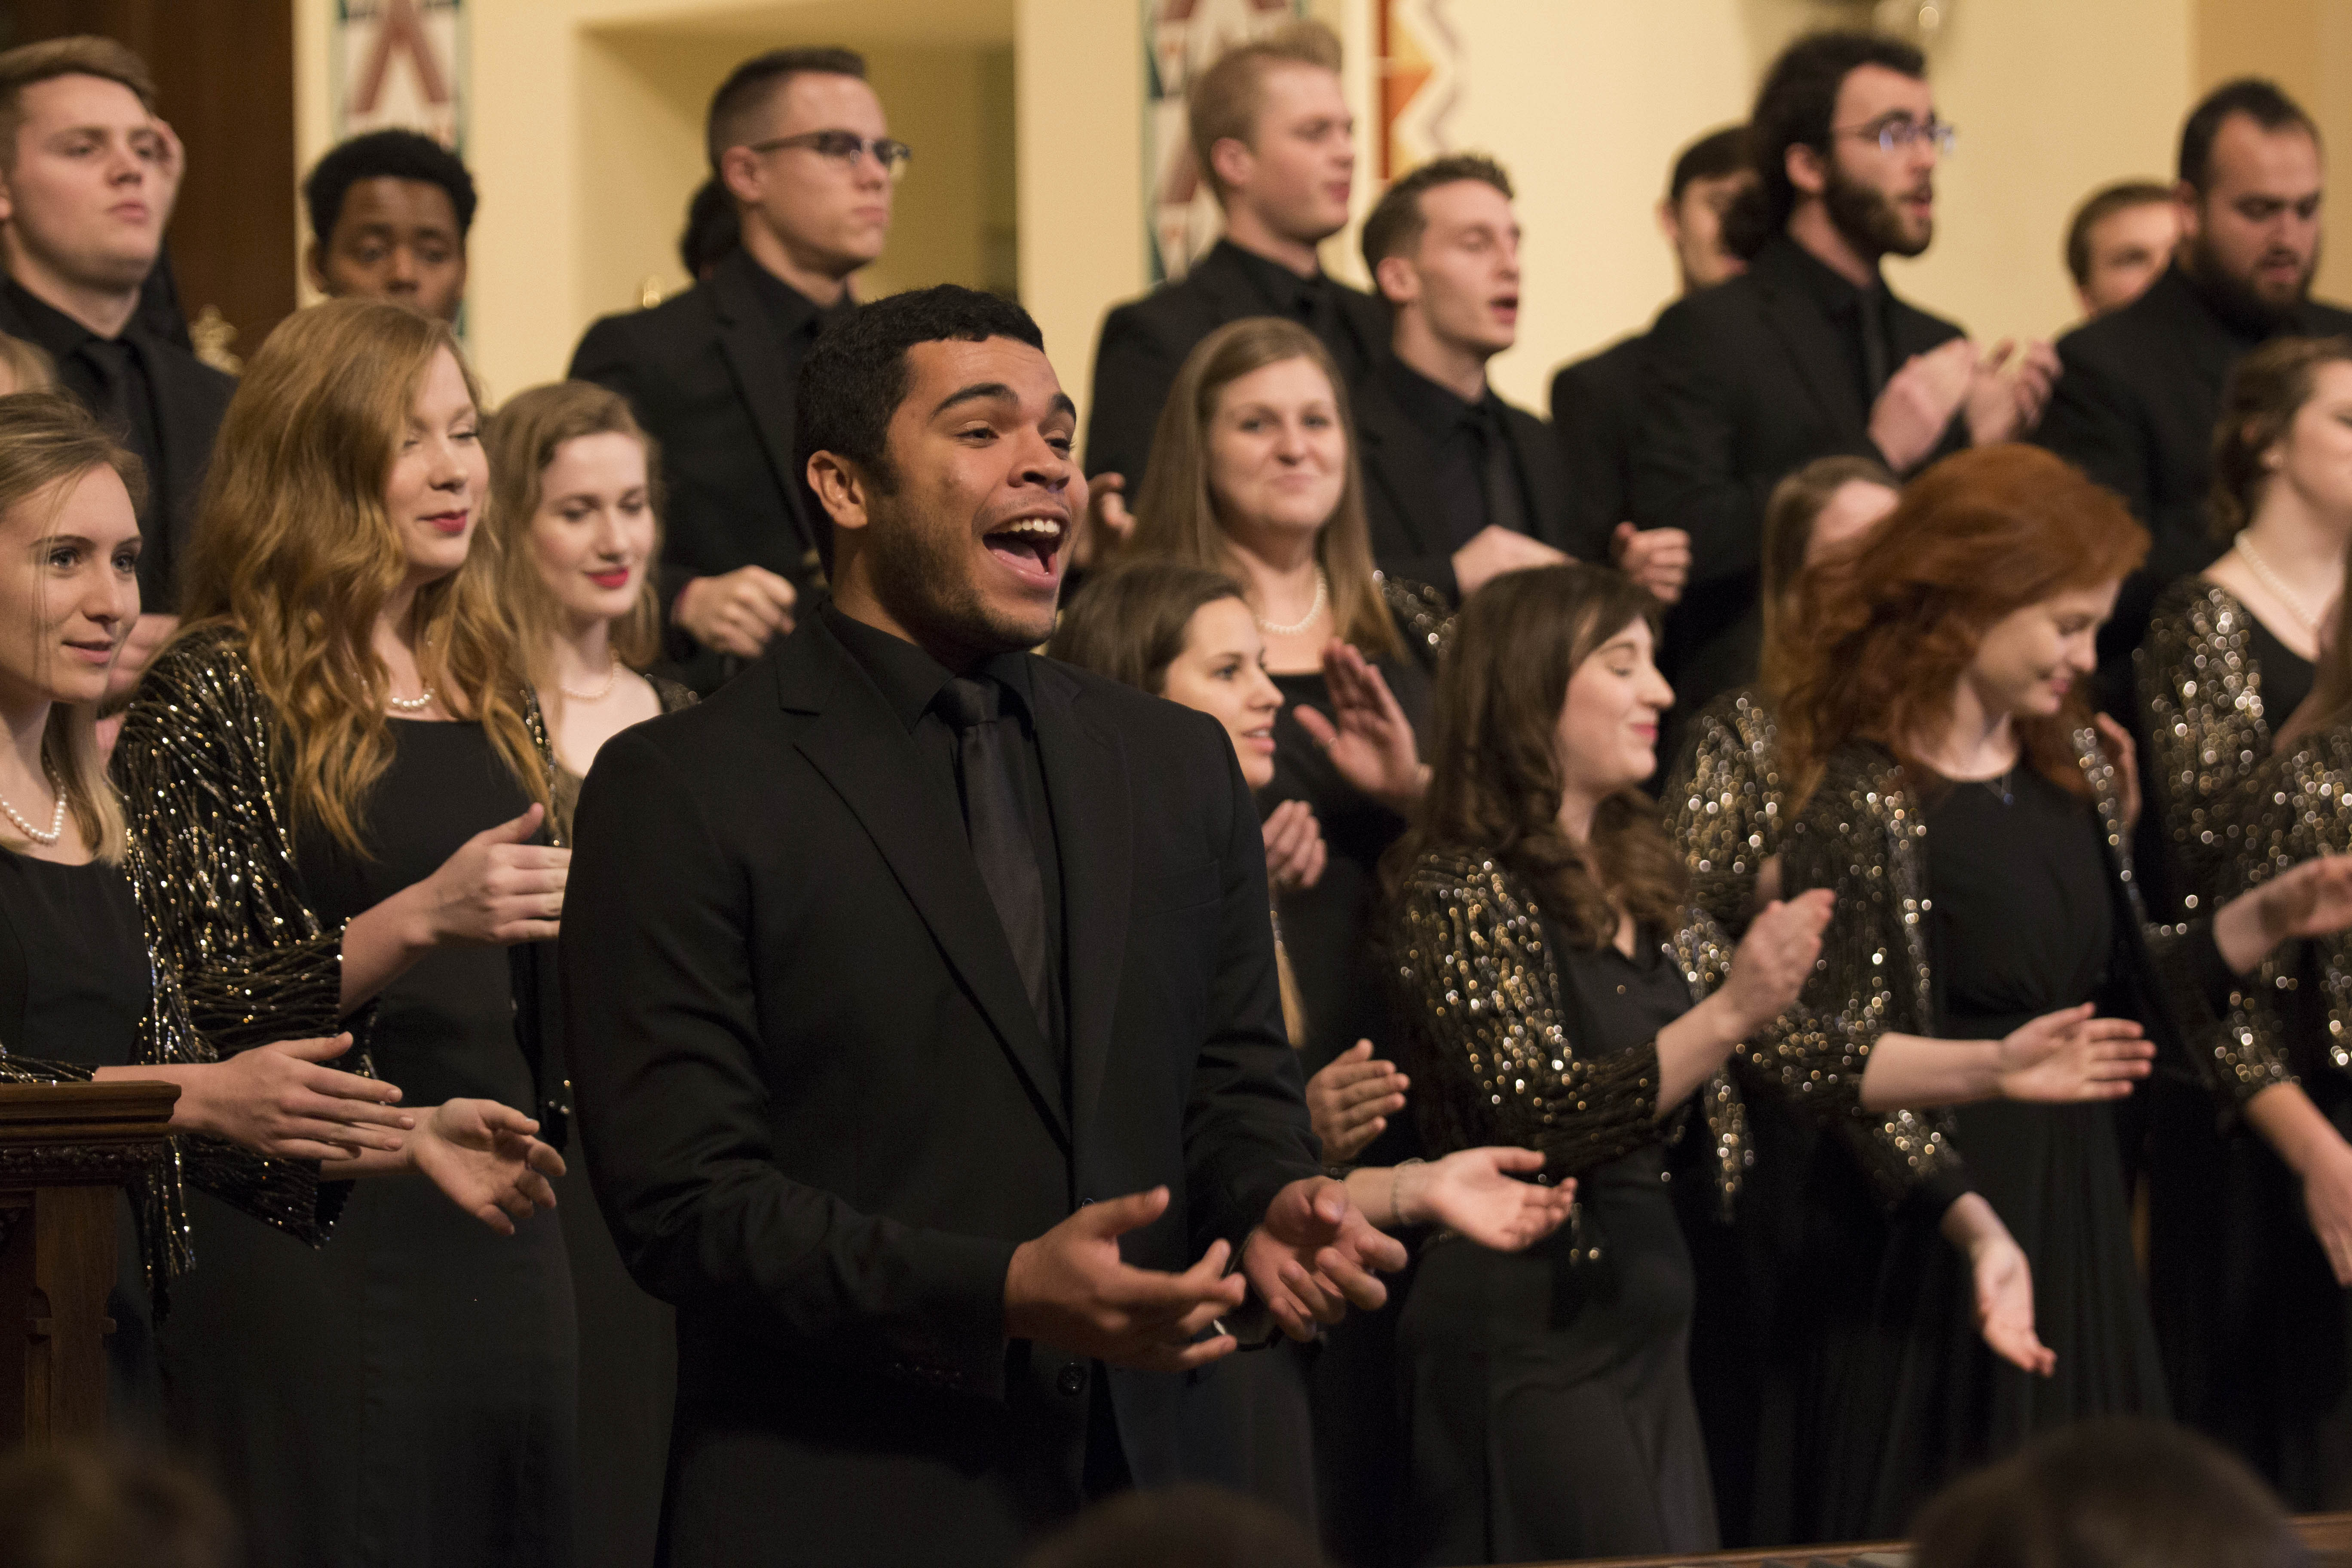 The University Singers have been selected as a semi-finalist in the college/university division of The American Prize in Choral Performance.